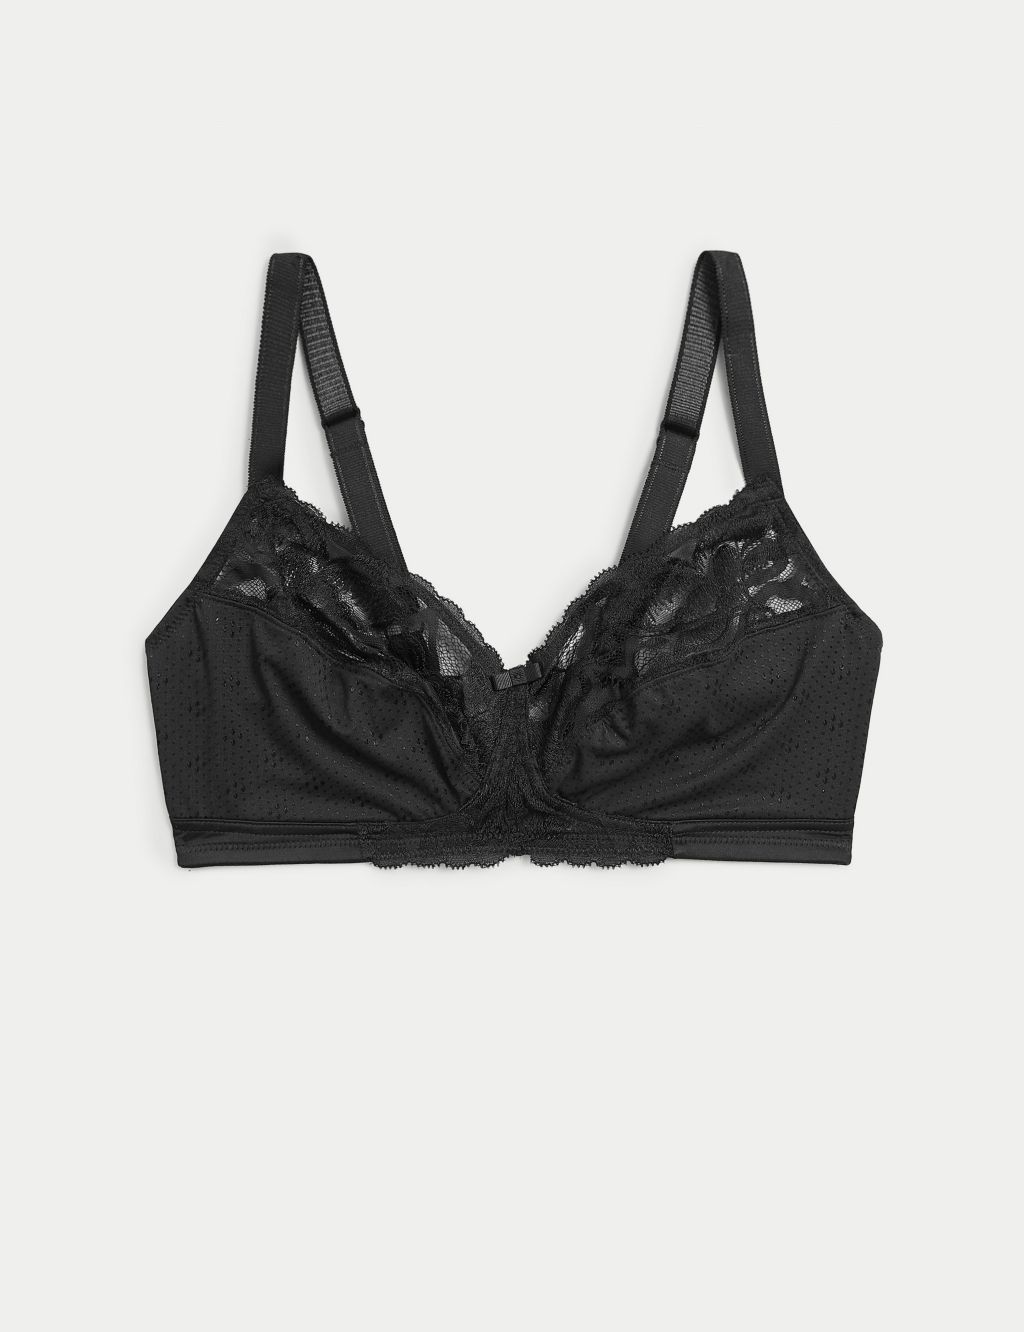 New Ex M&S Cotton & Lace Non-Padded Underwired Full Cup Bra A-E